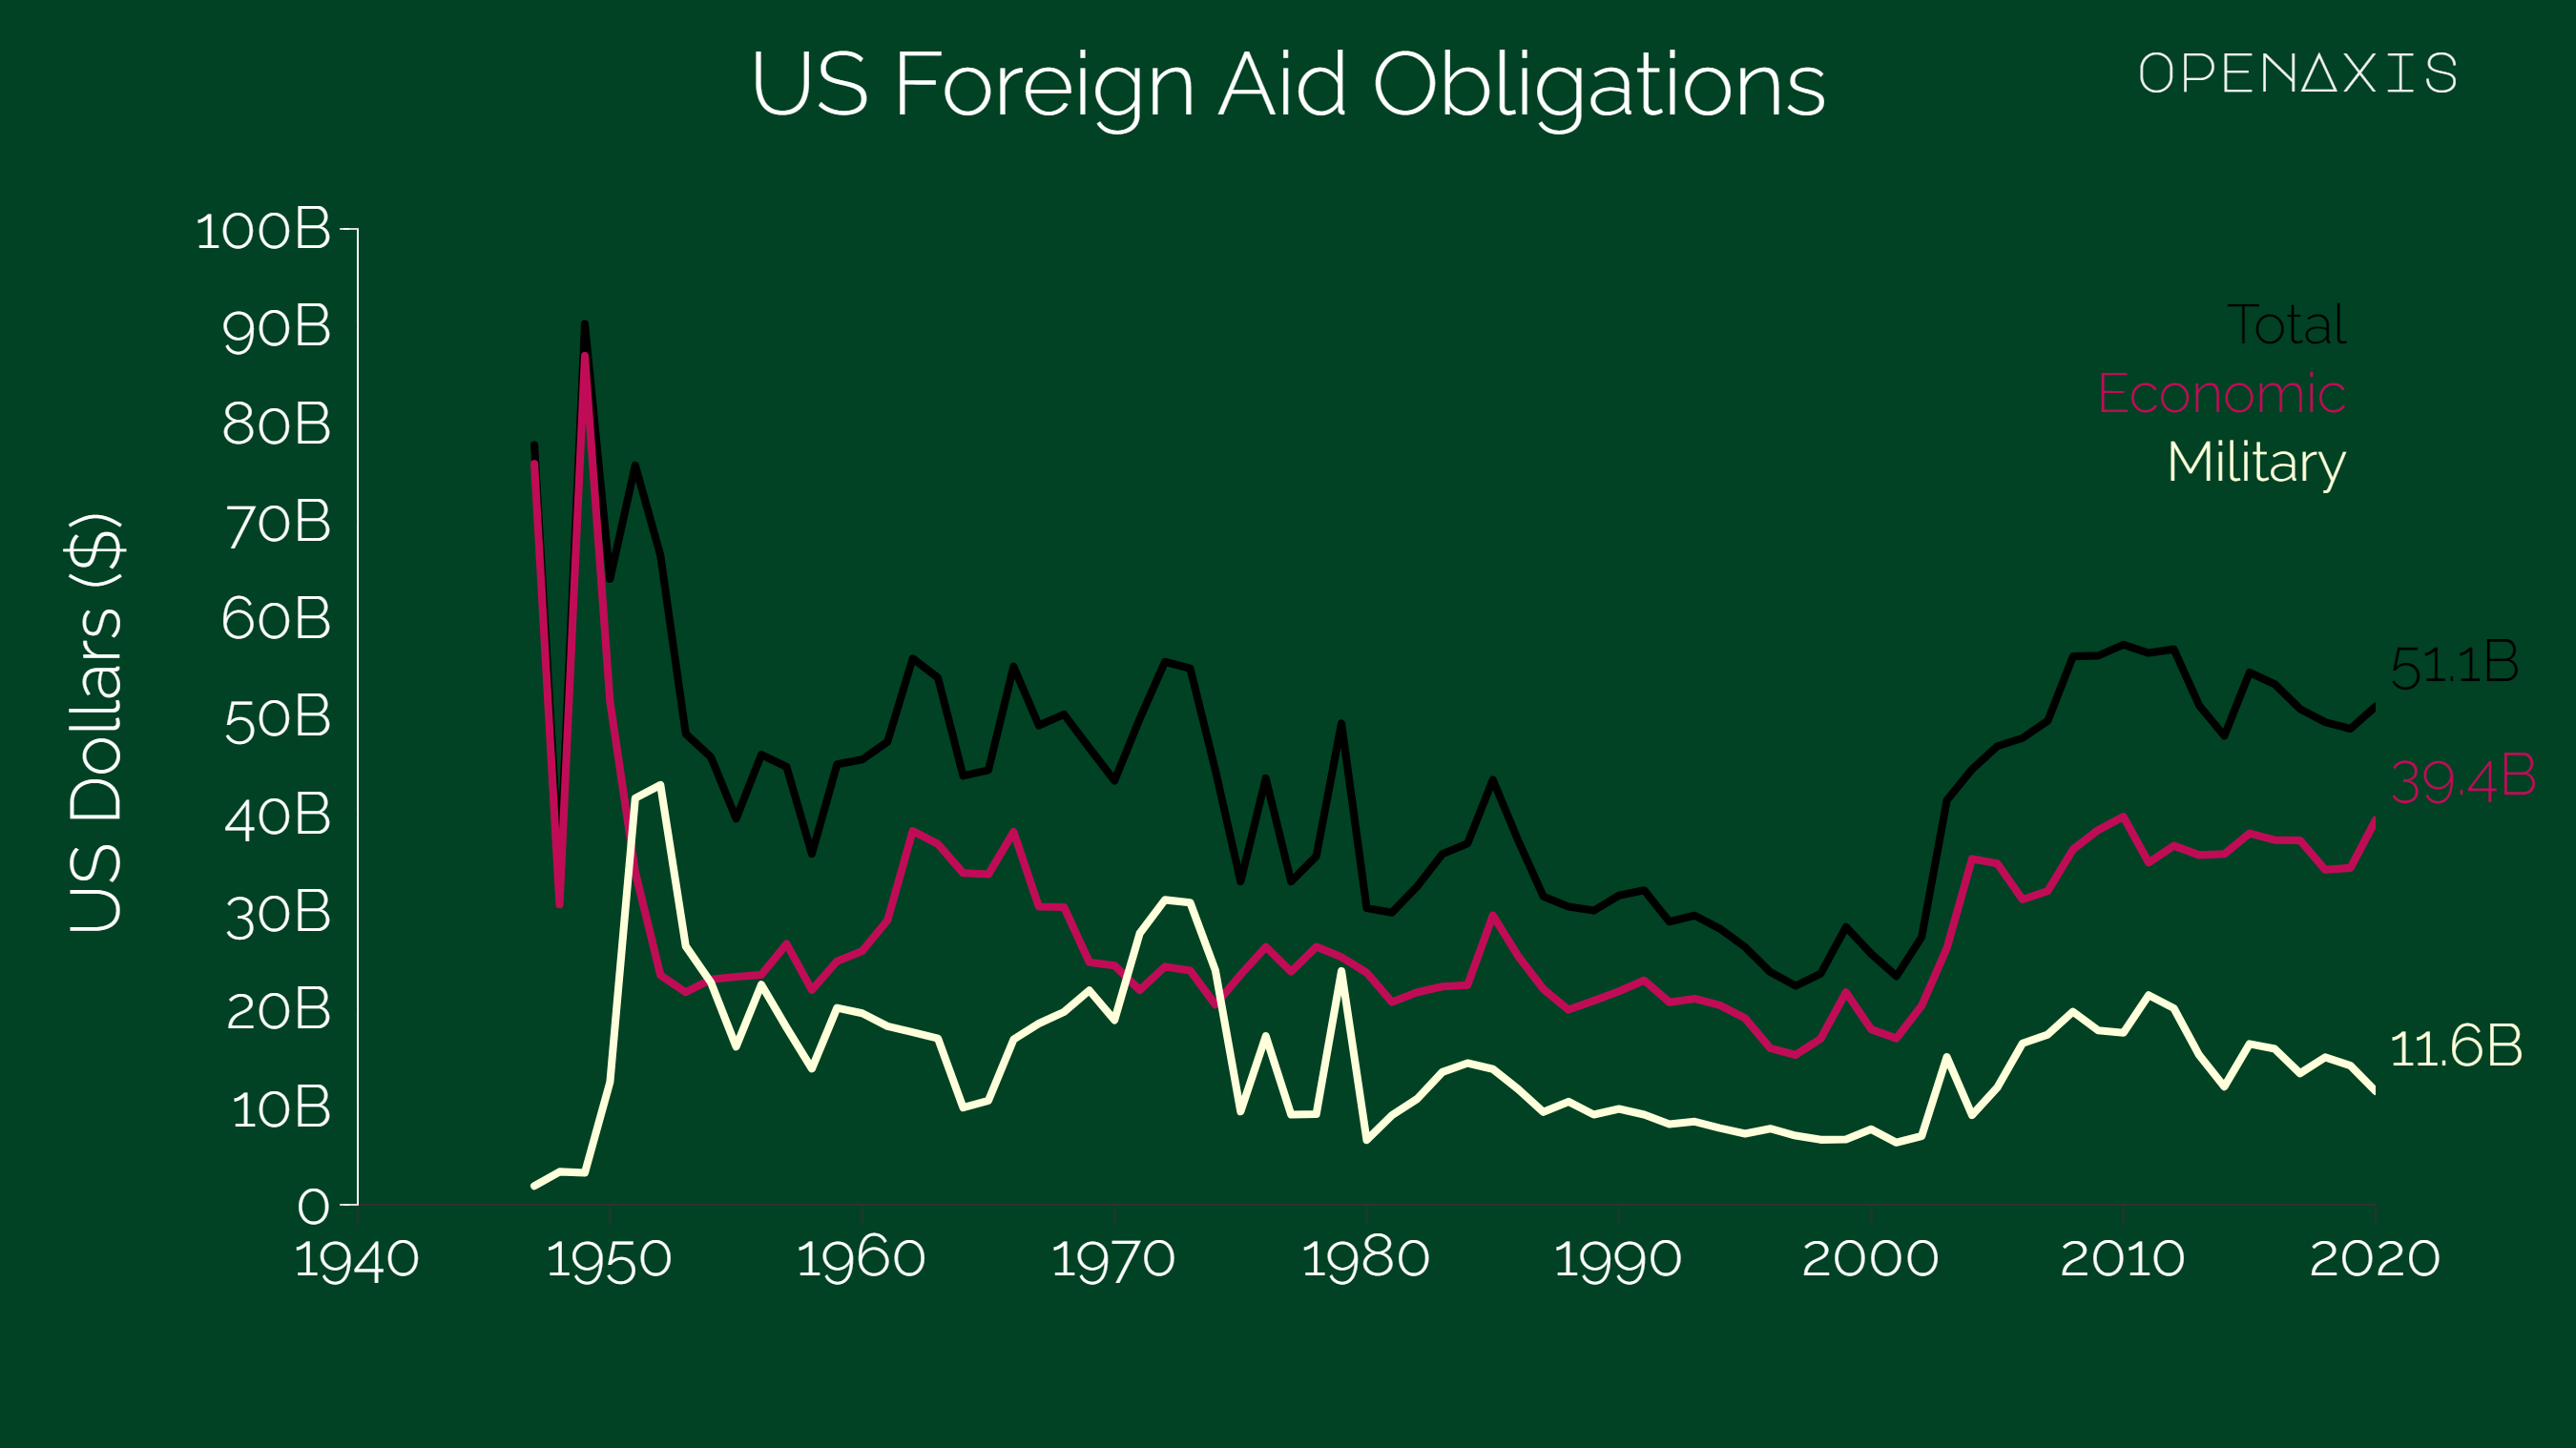 "US Foreign Aid Obligations"